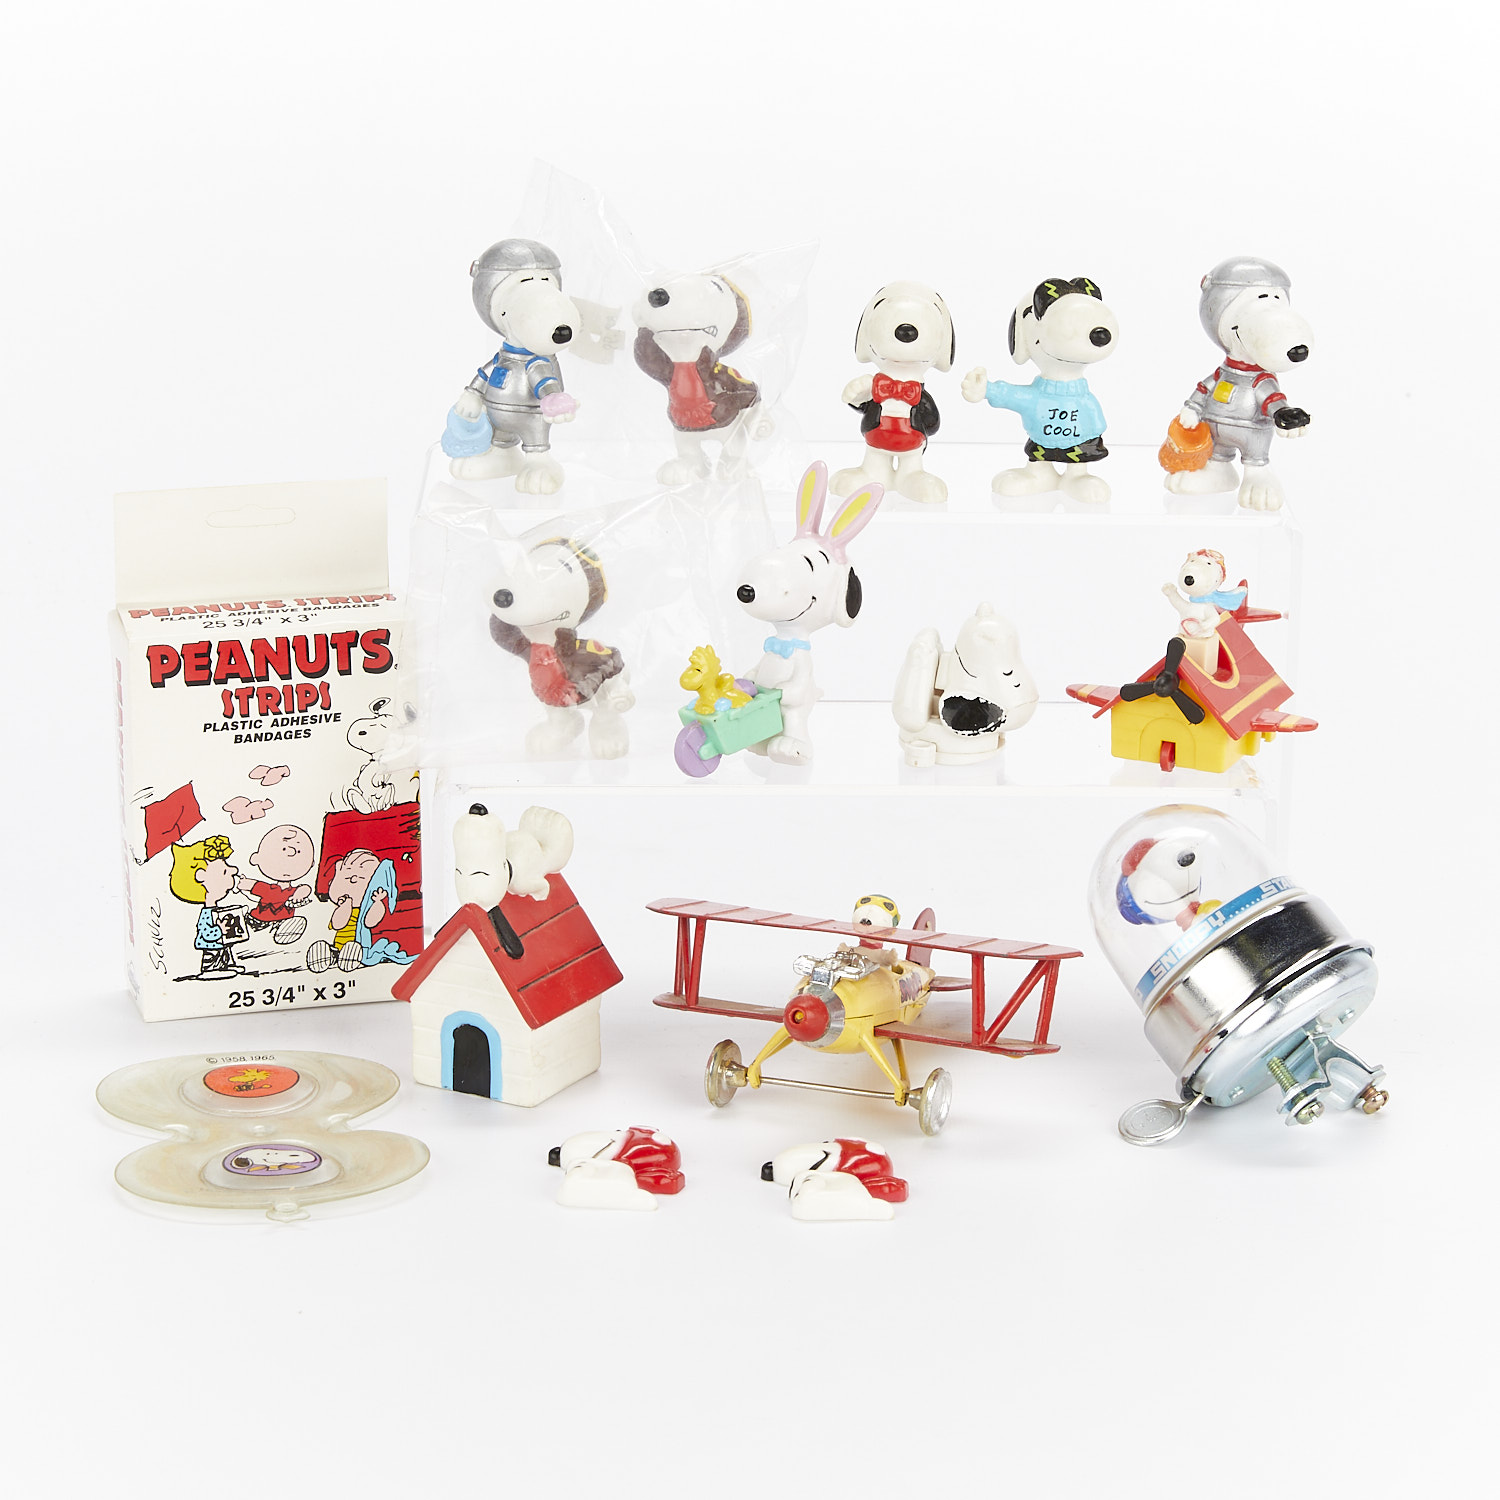 Group of 16 Snoopy Figurines and Bandages